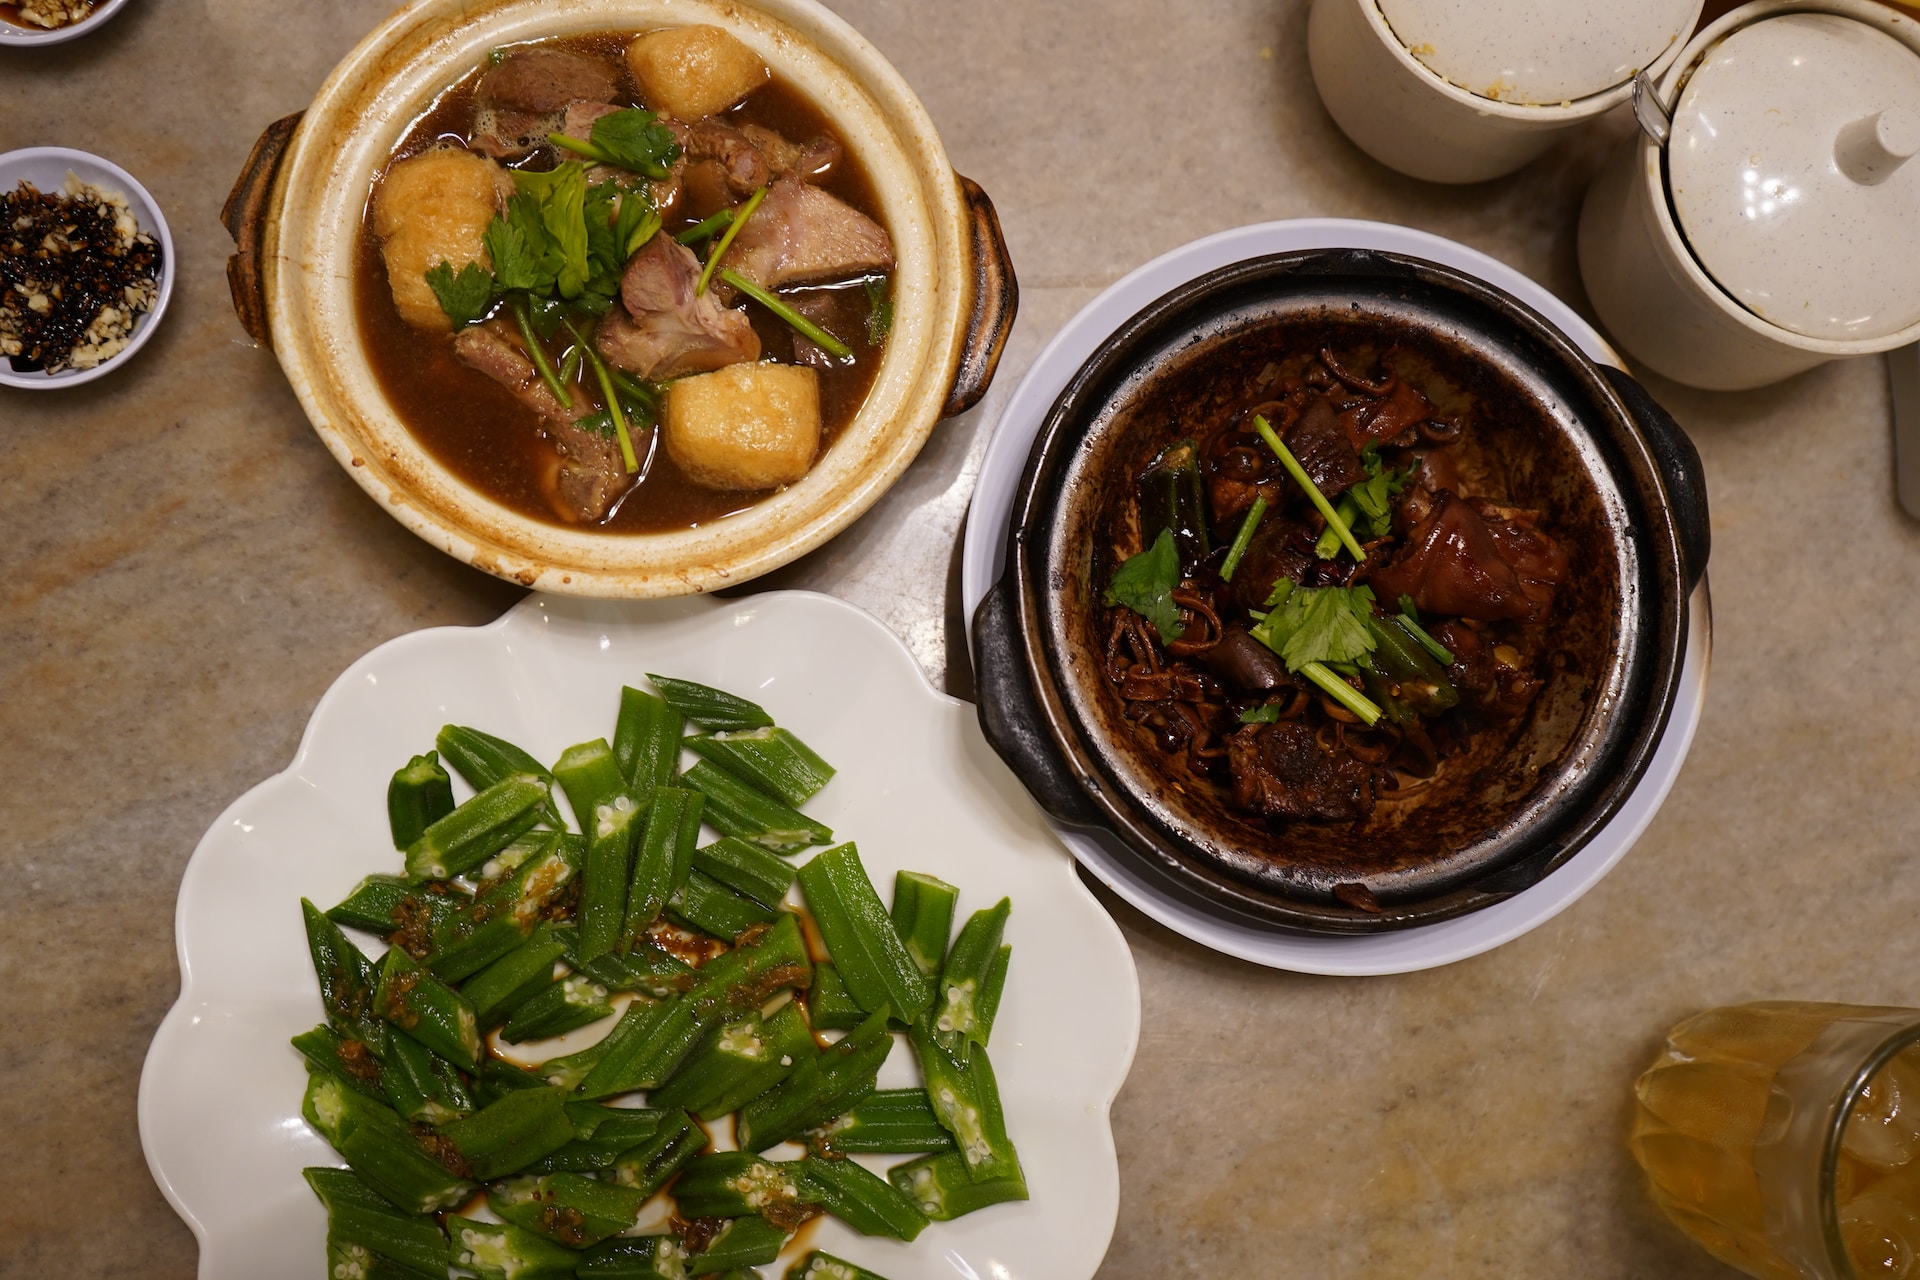 Soup and dry version Bak Kut Teh with Okra on the side